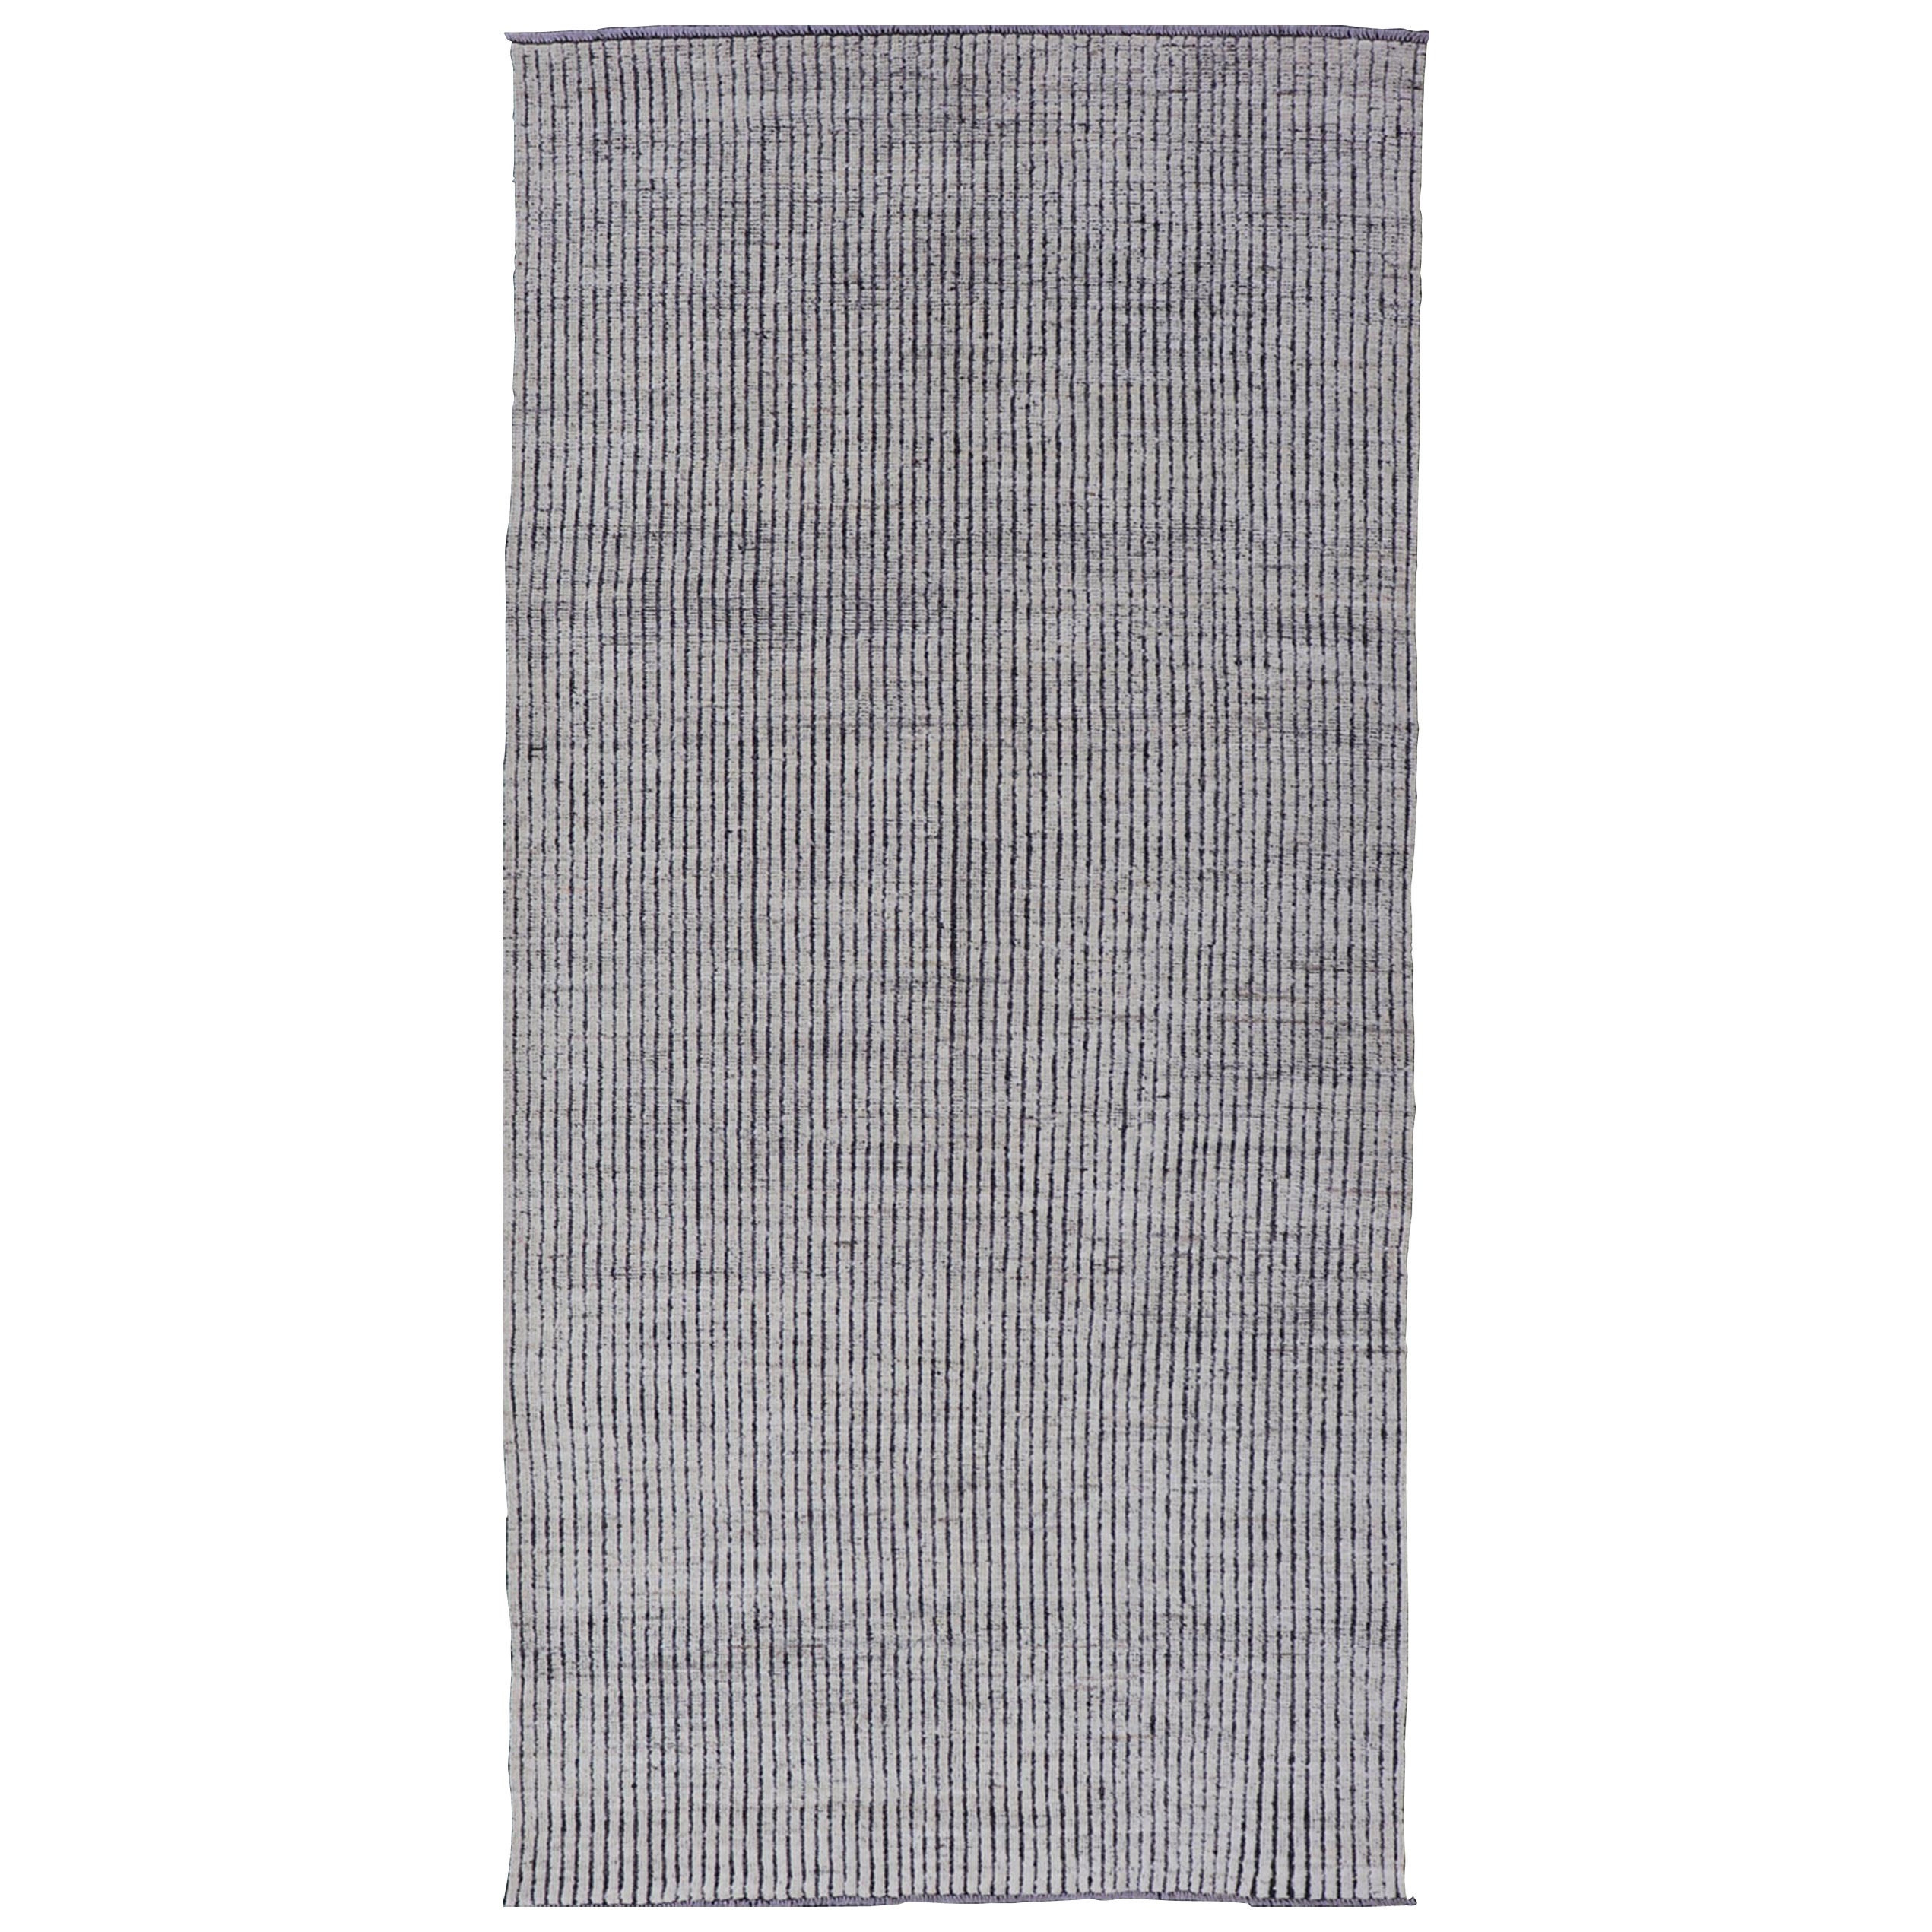 Modern Gallery Rug in White and Black background and Distressed Texture